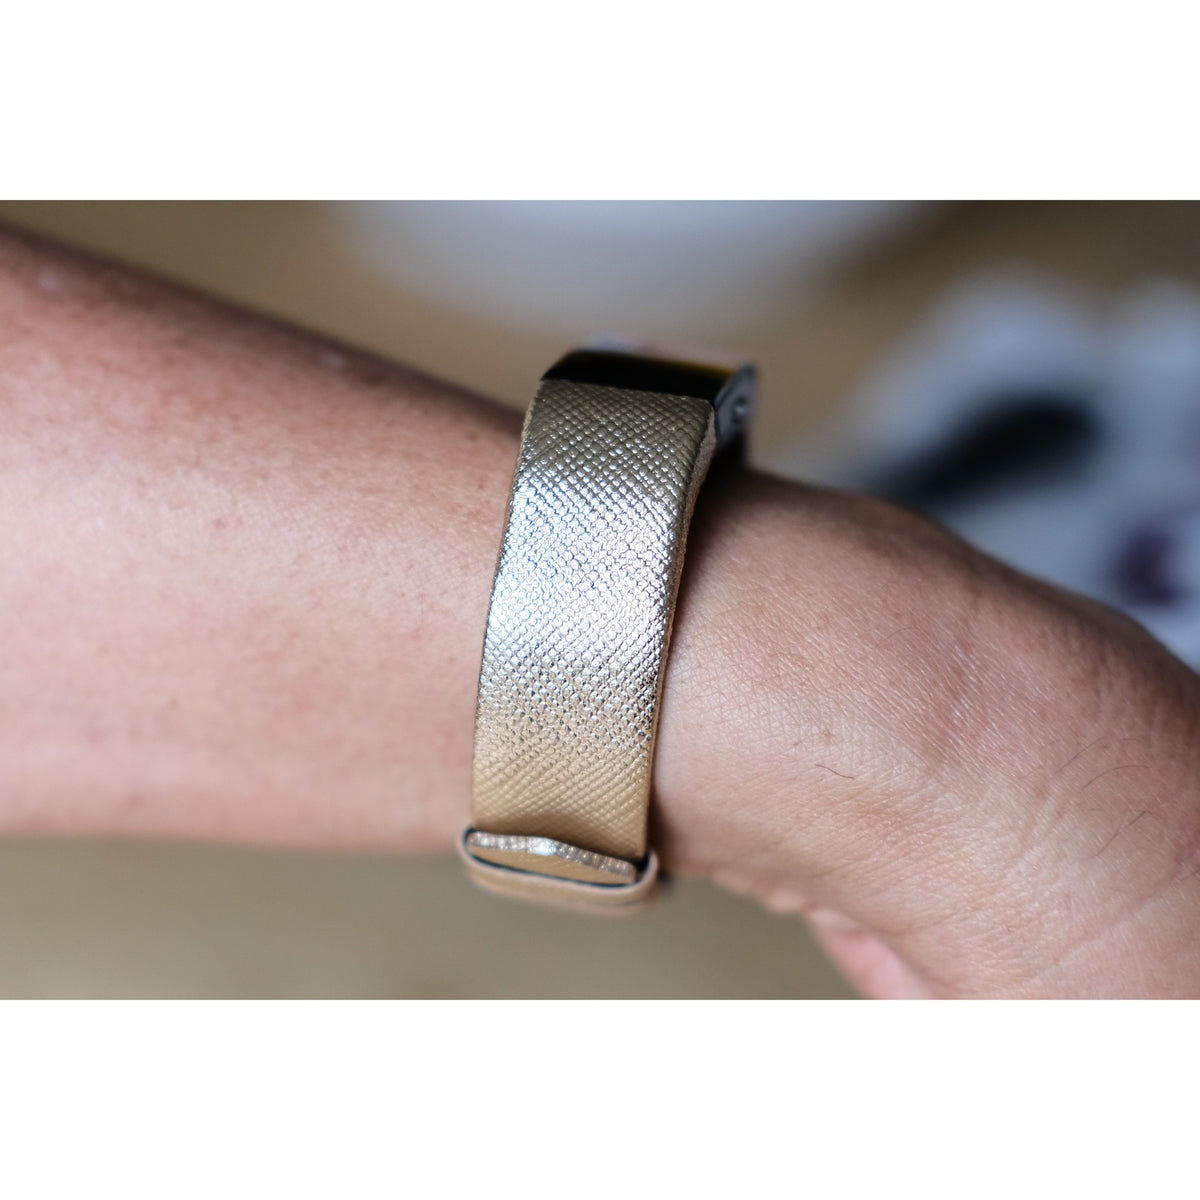 Leather Fitbit Charge 2 Bands - OzStraps